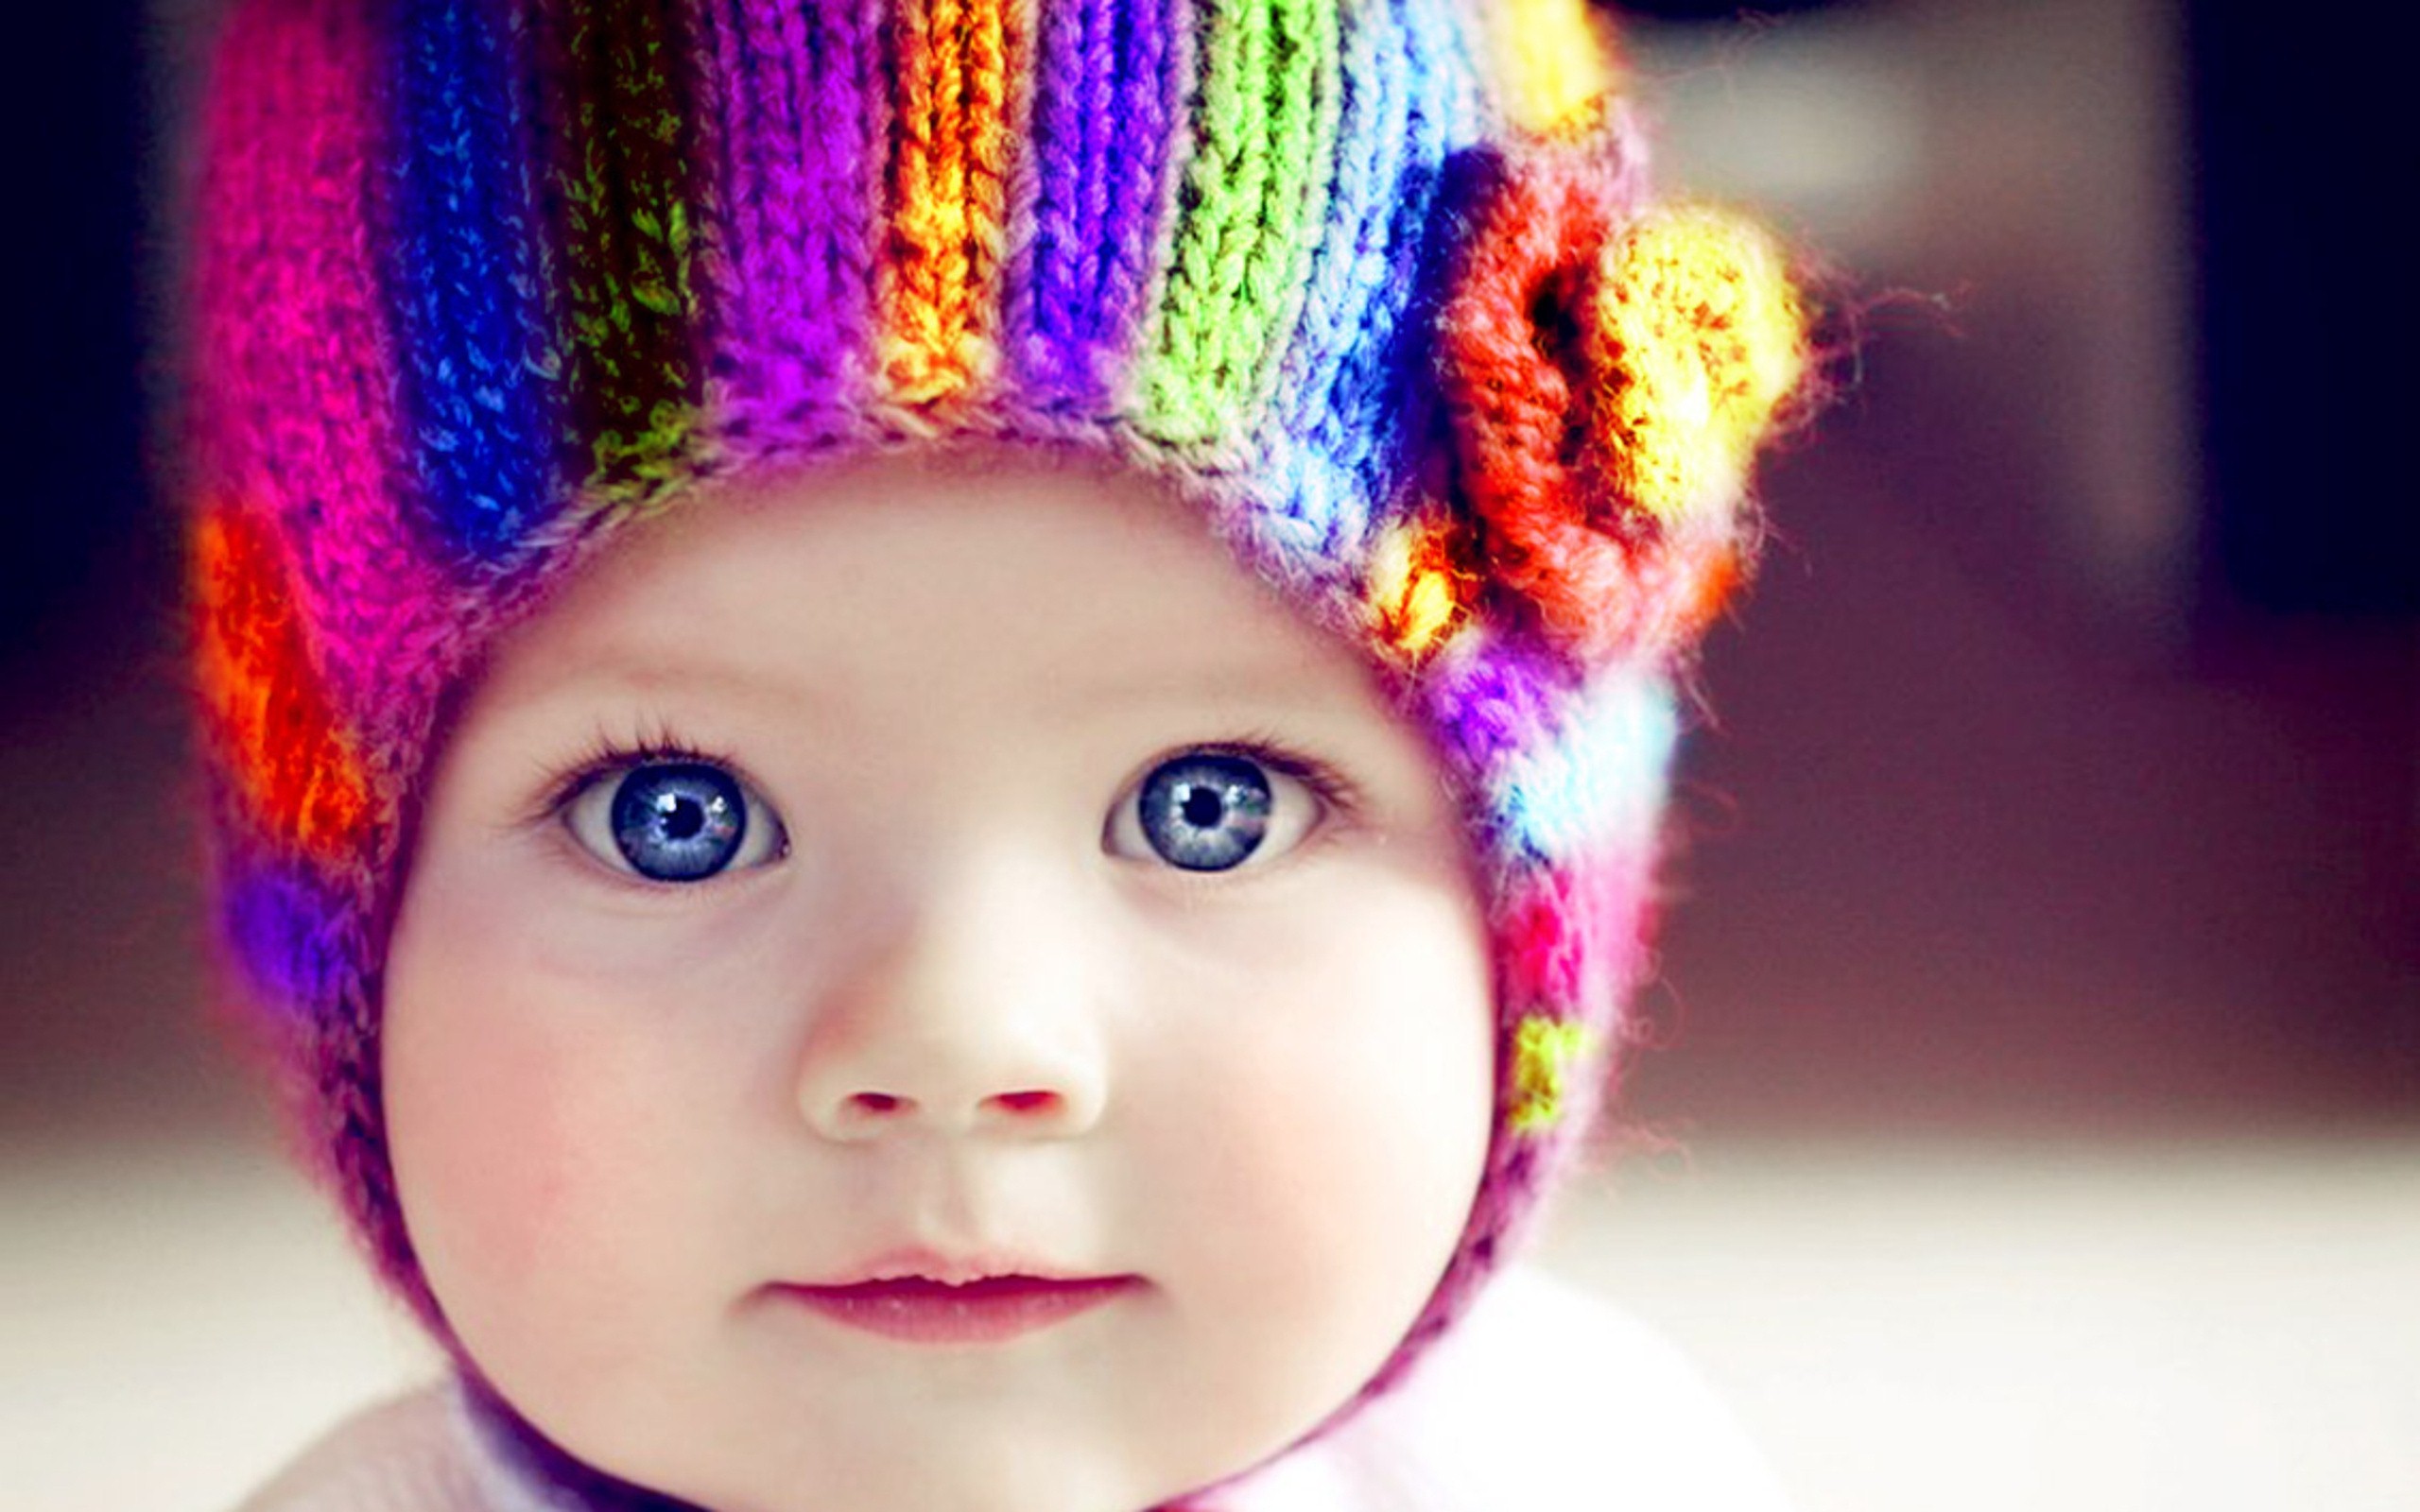 blue eyes for Cute Baby photo